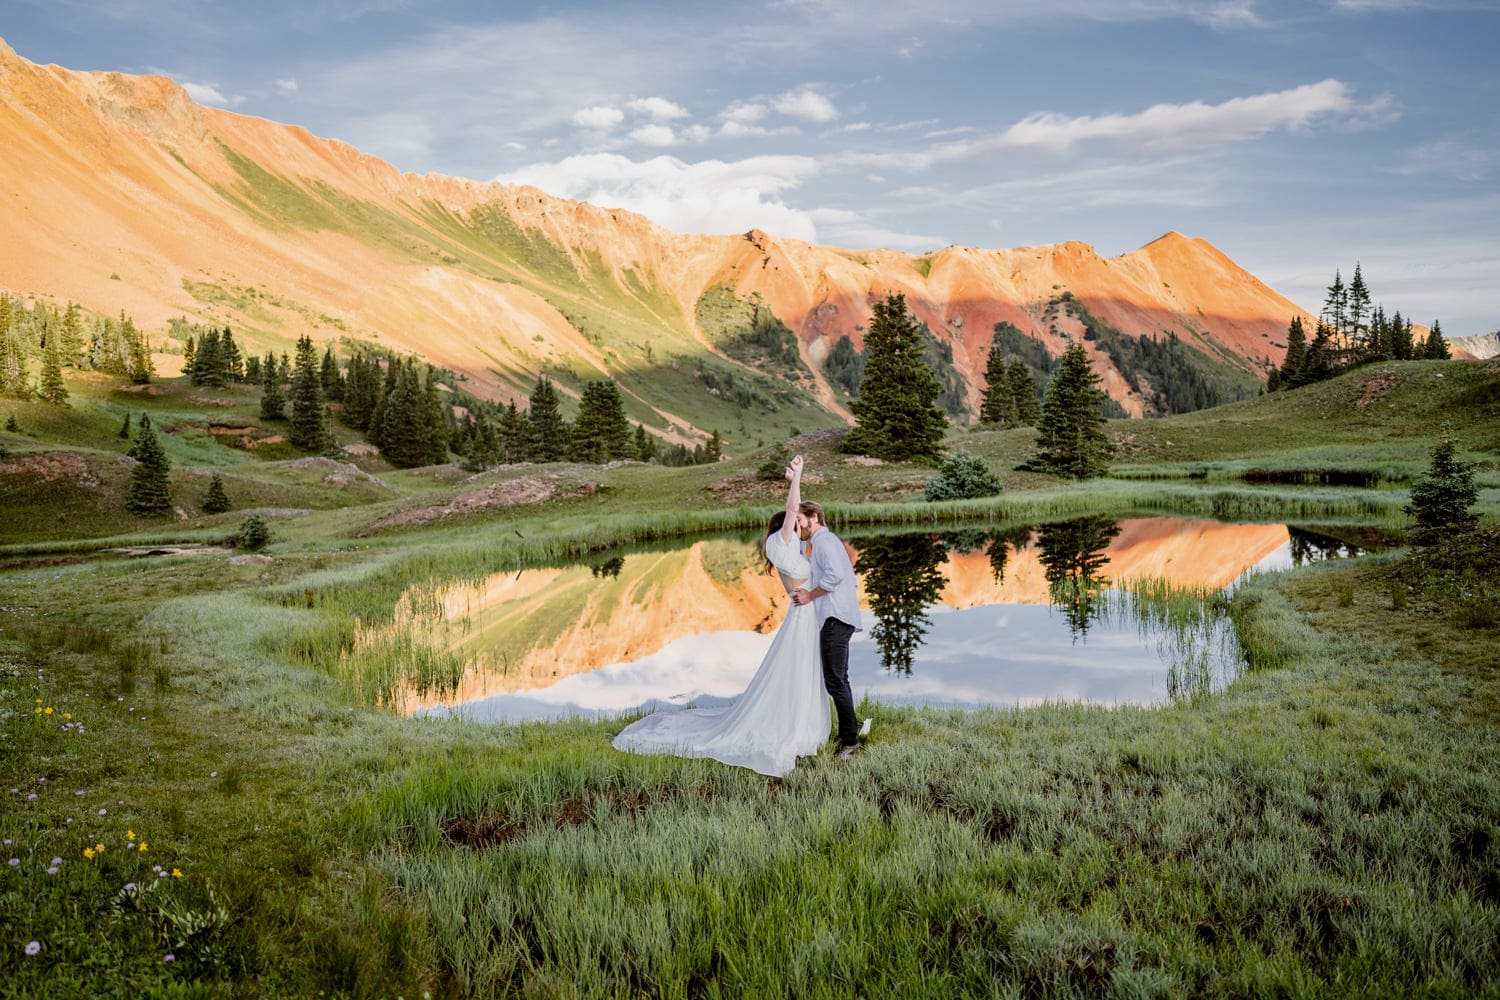 Bride lifting her hands up in celebration after getting married in the mountains.